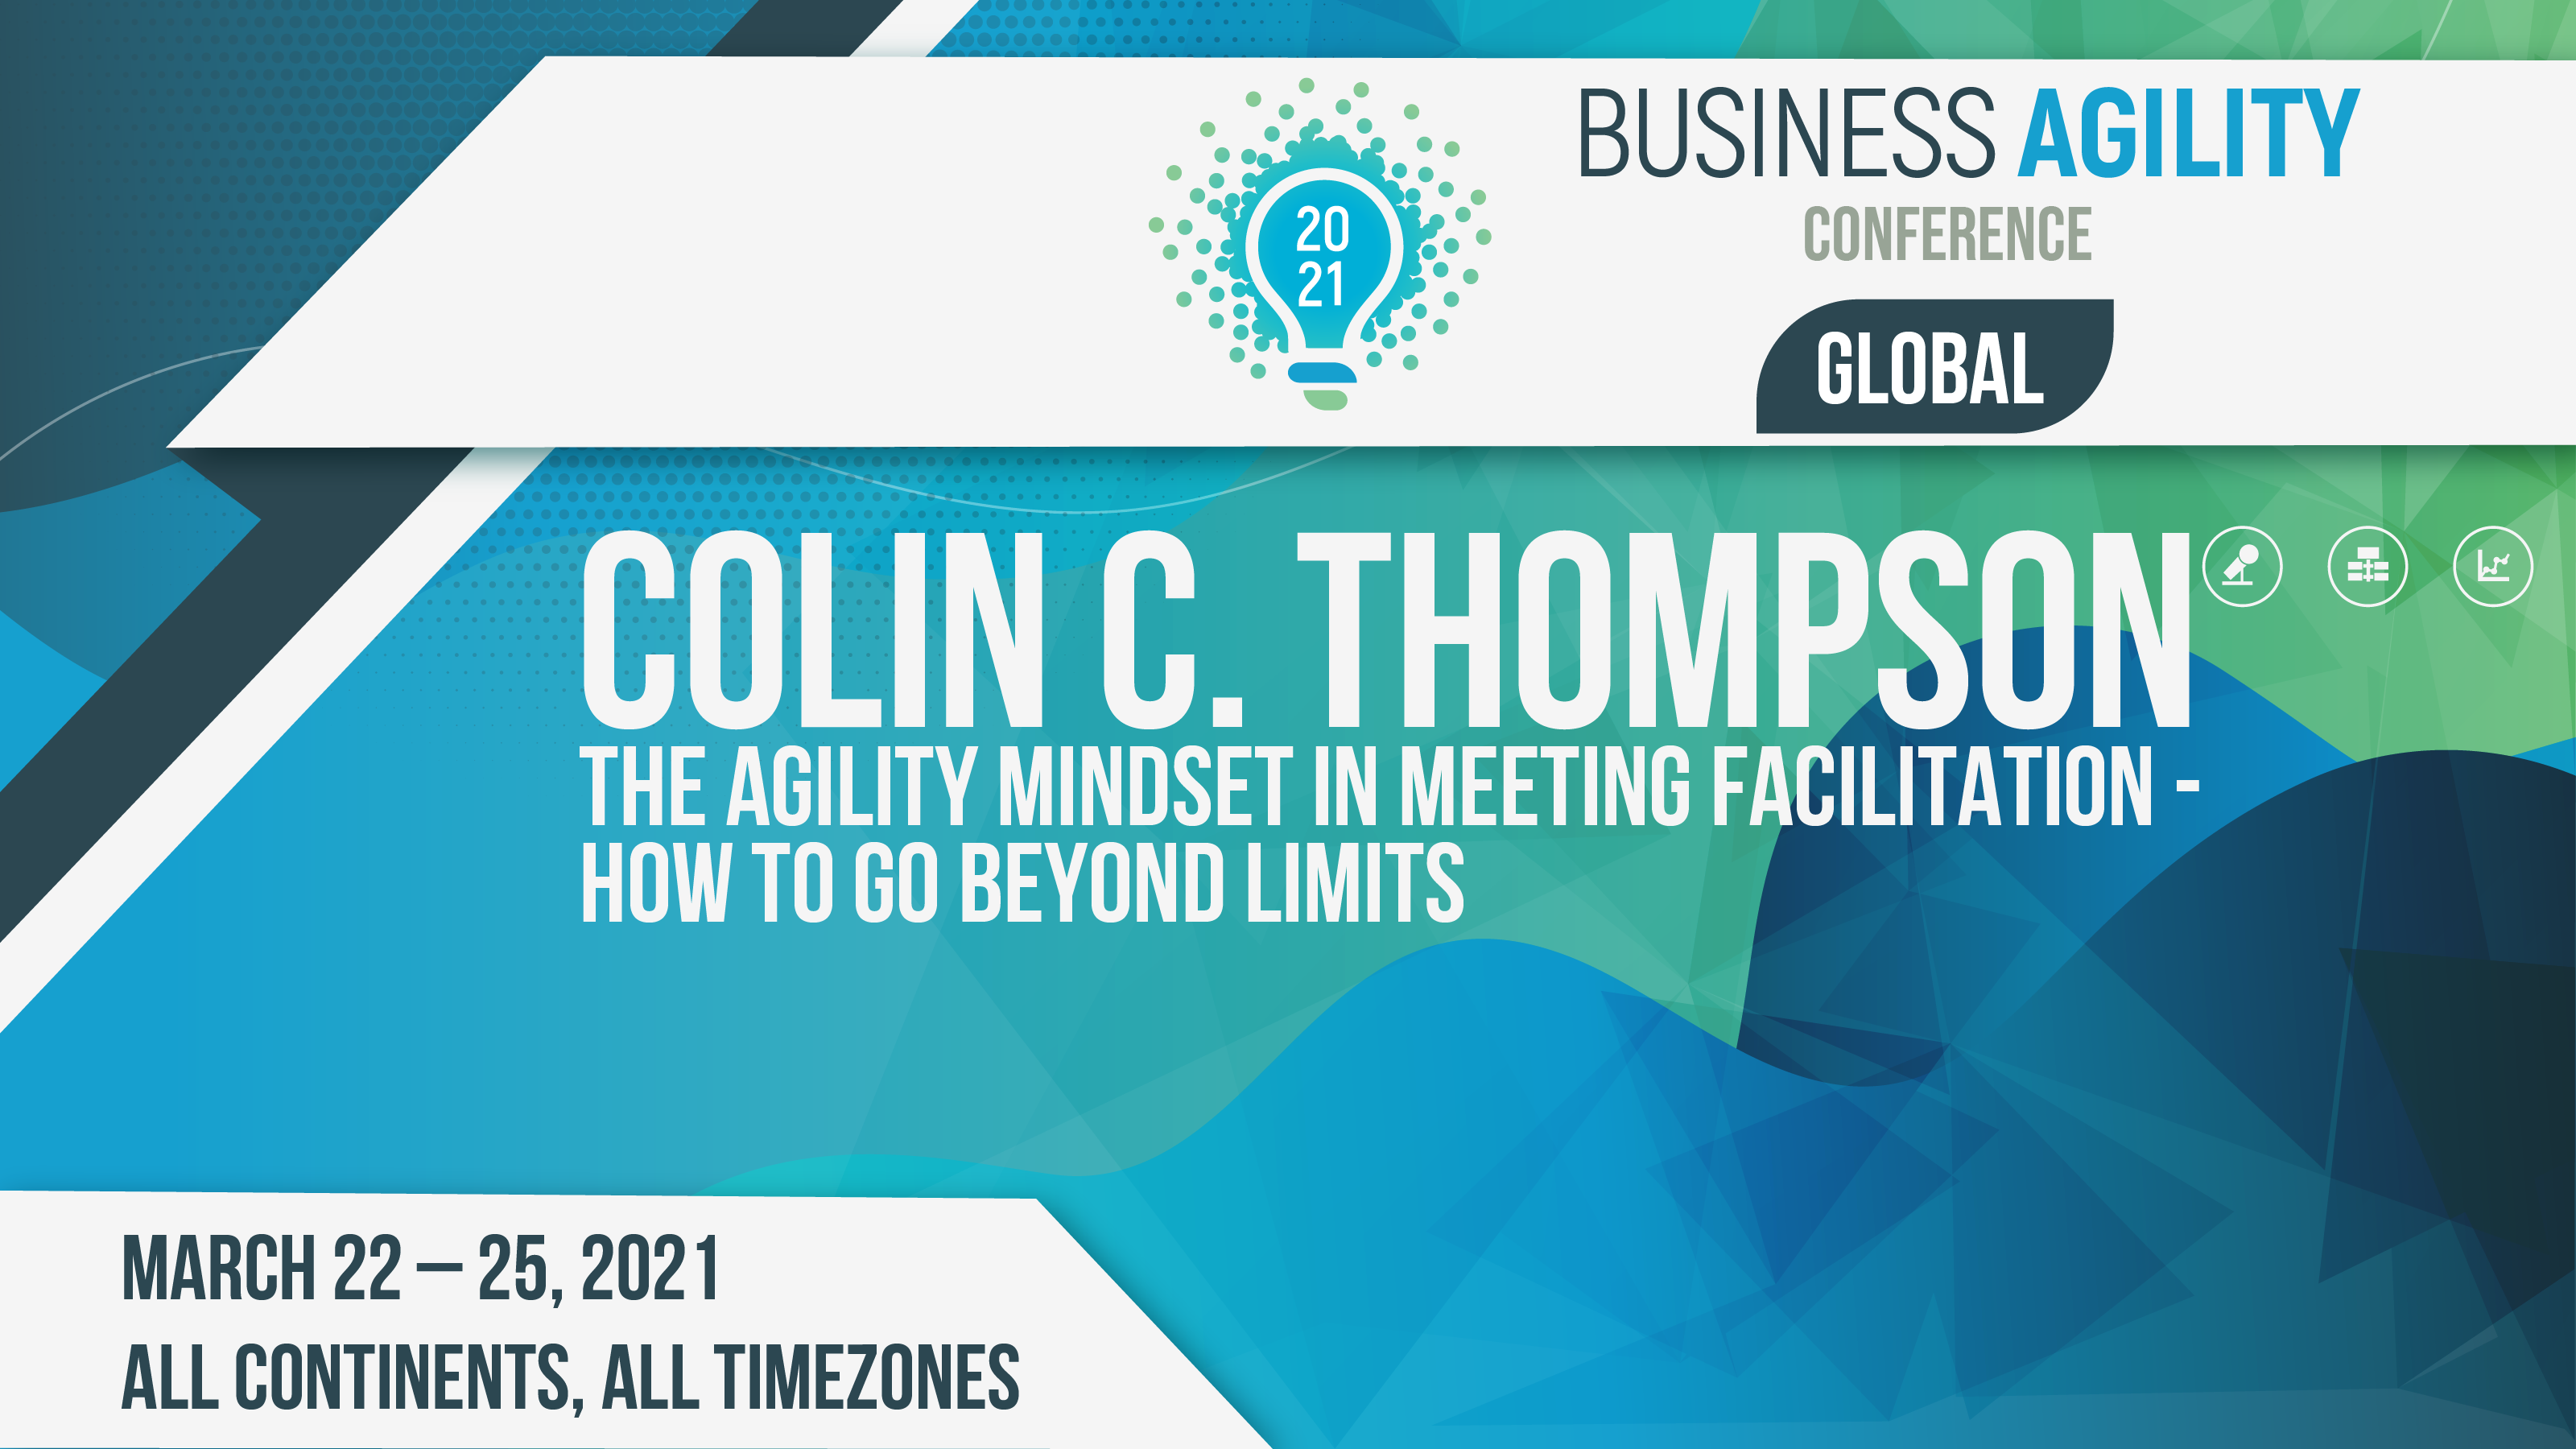 The Agility Mindset in Meeting Facilitation